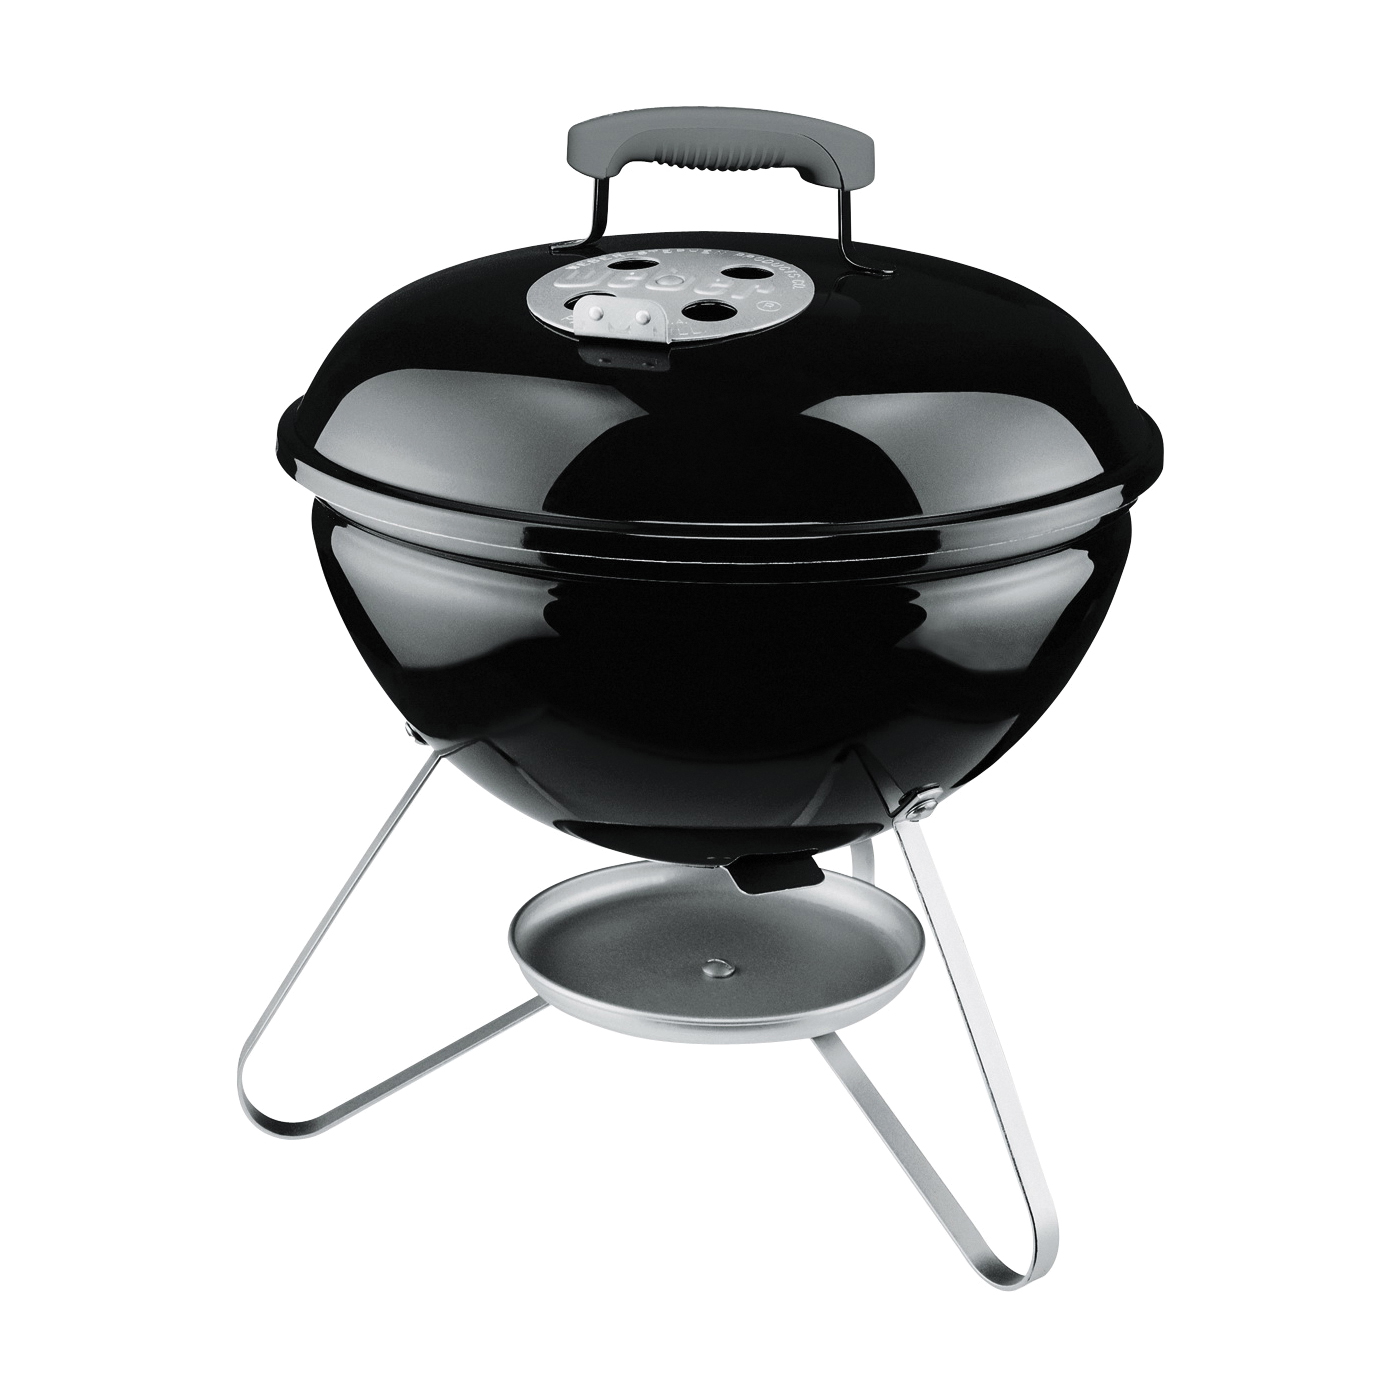 Smokey Joe 10020 Charcoal Grill, 147 sq-in Primary Cooking Surface, Black